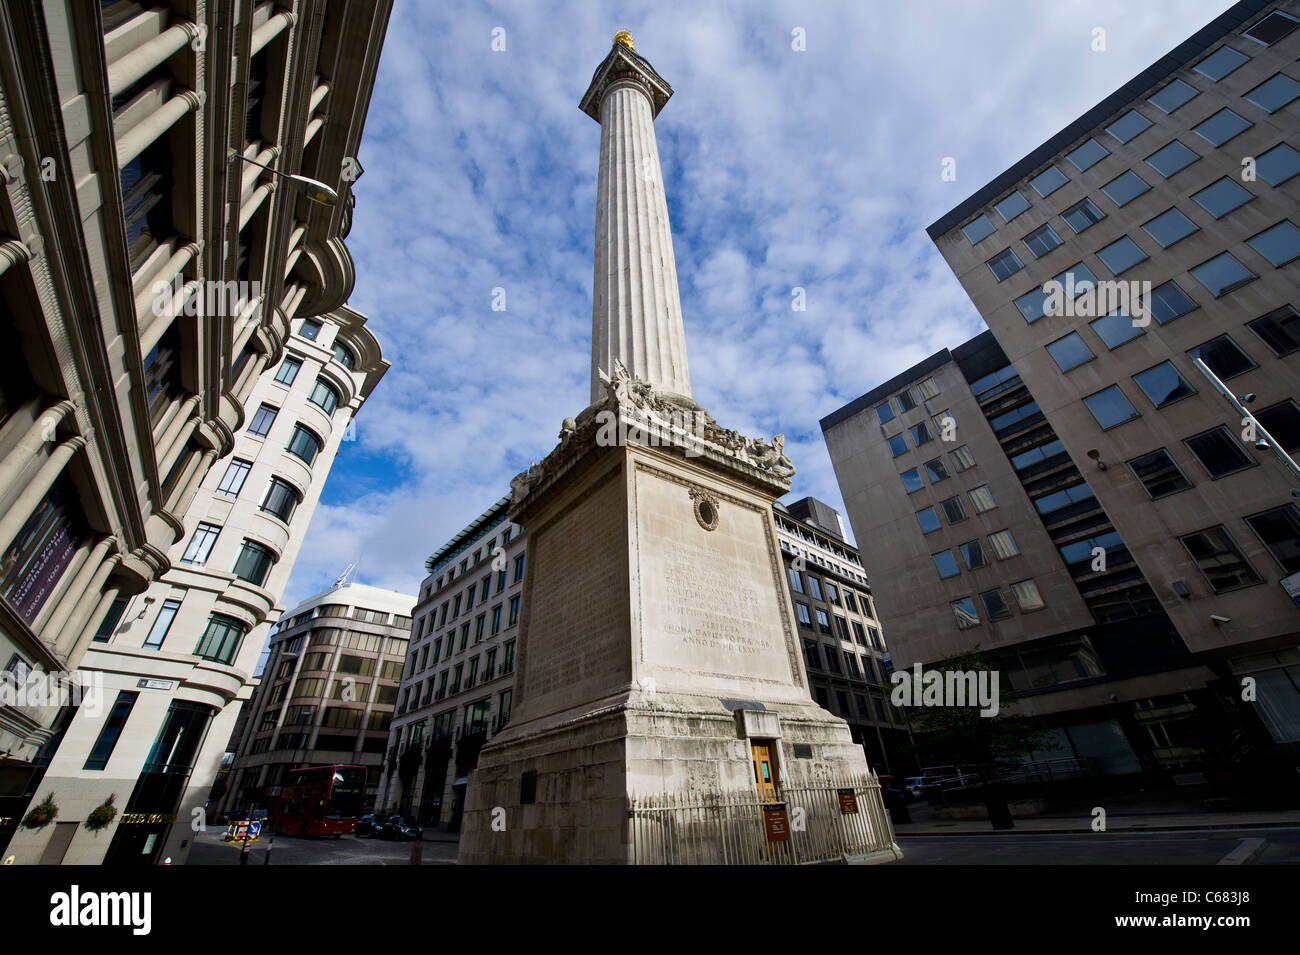 The Monument, erected near Pudding Lane where the great fire of London